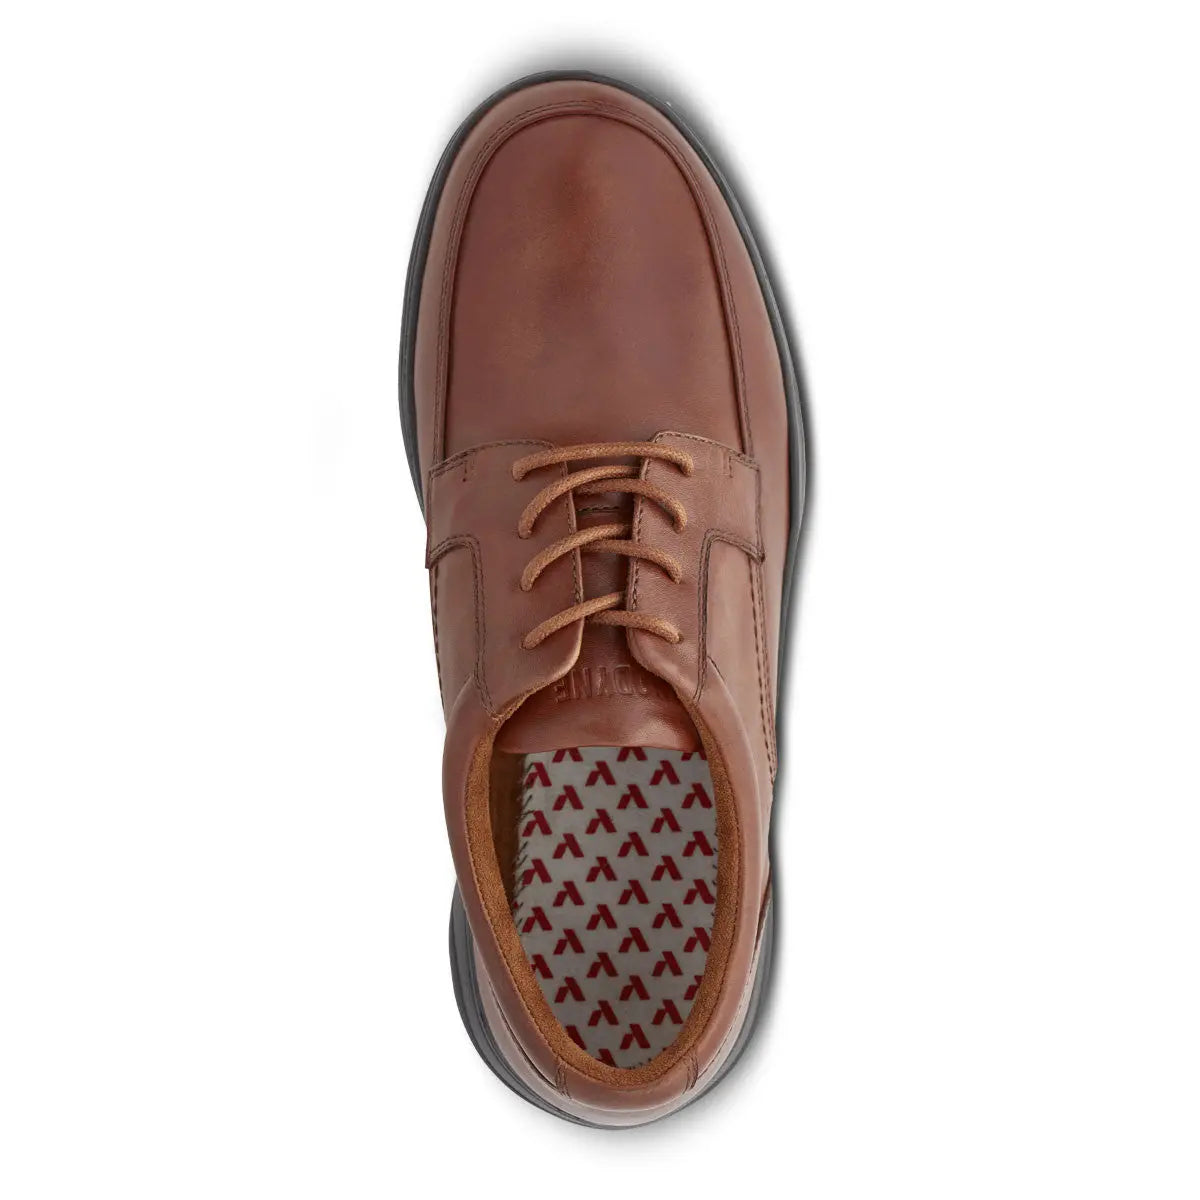 Anodyne Men's No.12 Oxford - BURNISHED BROWN available 3 widths